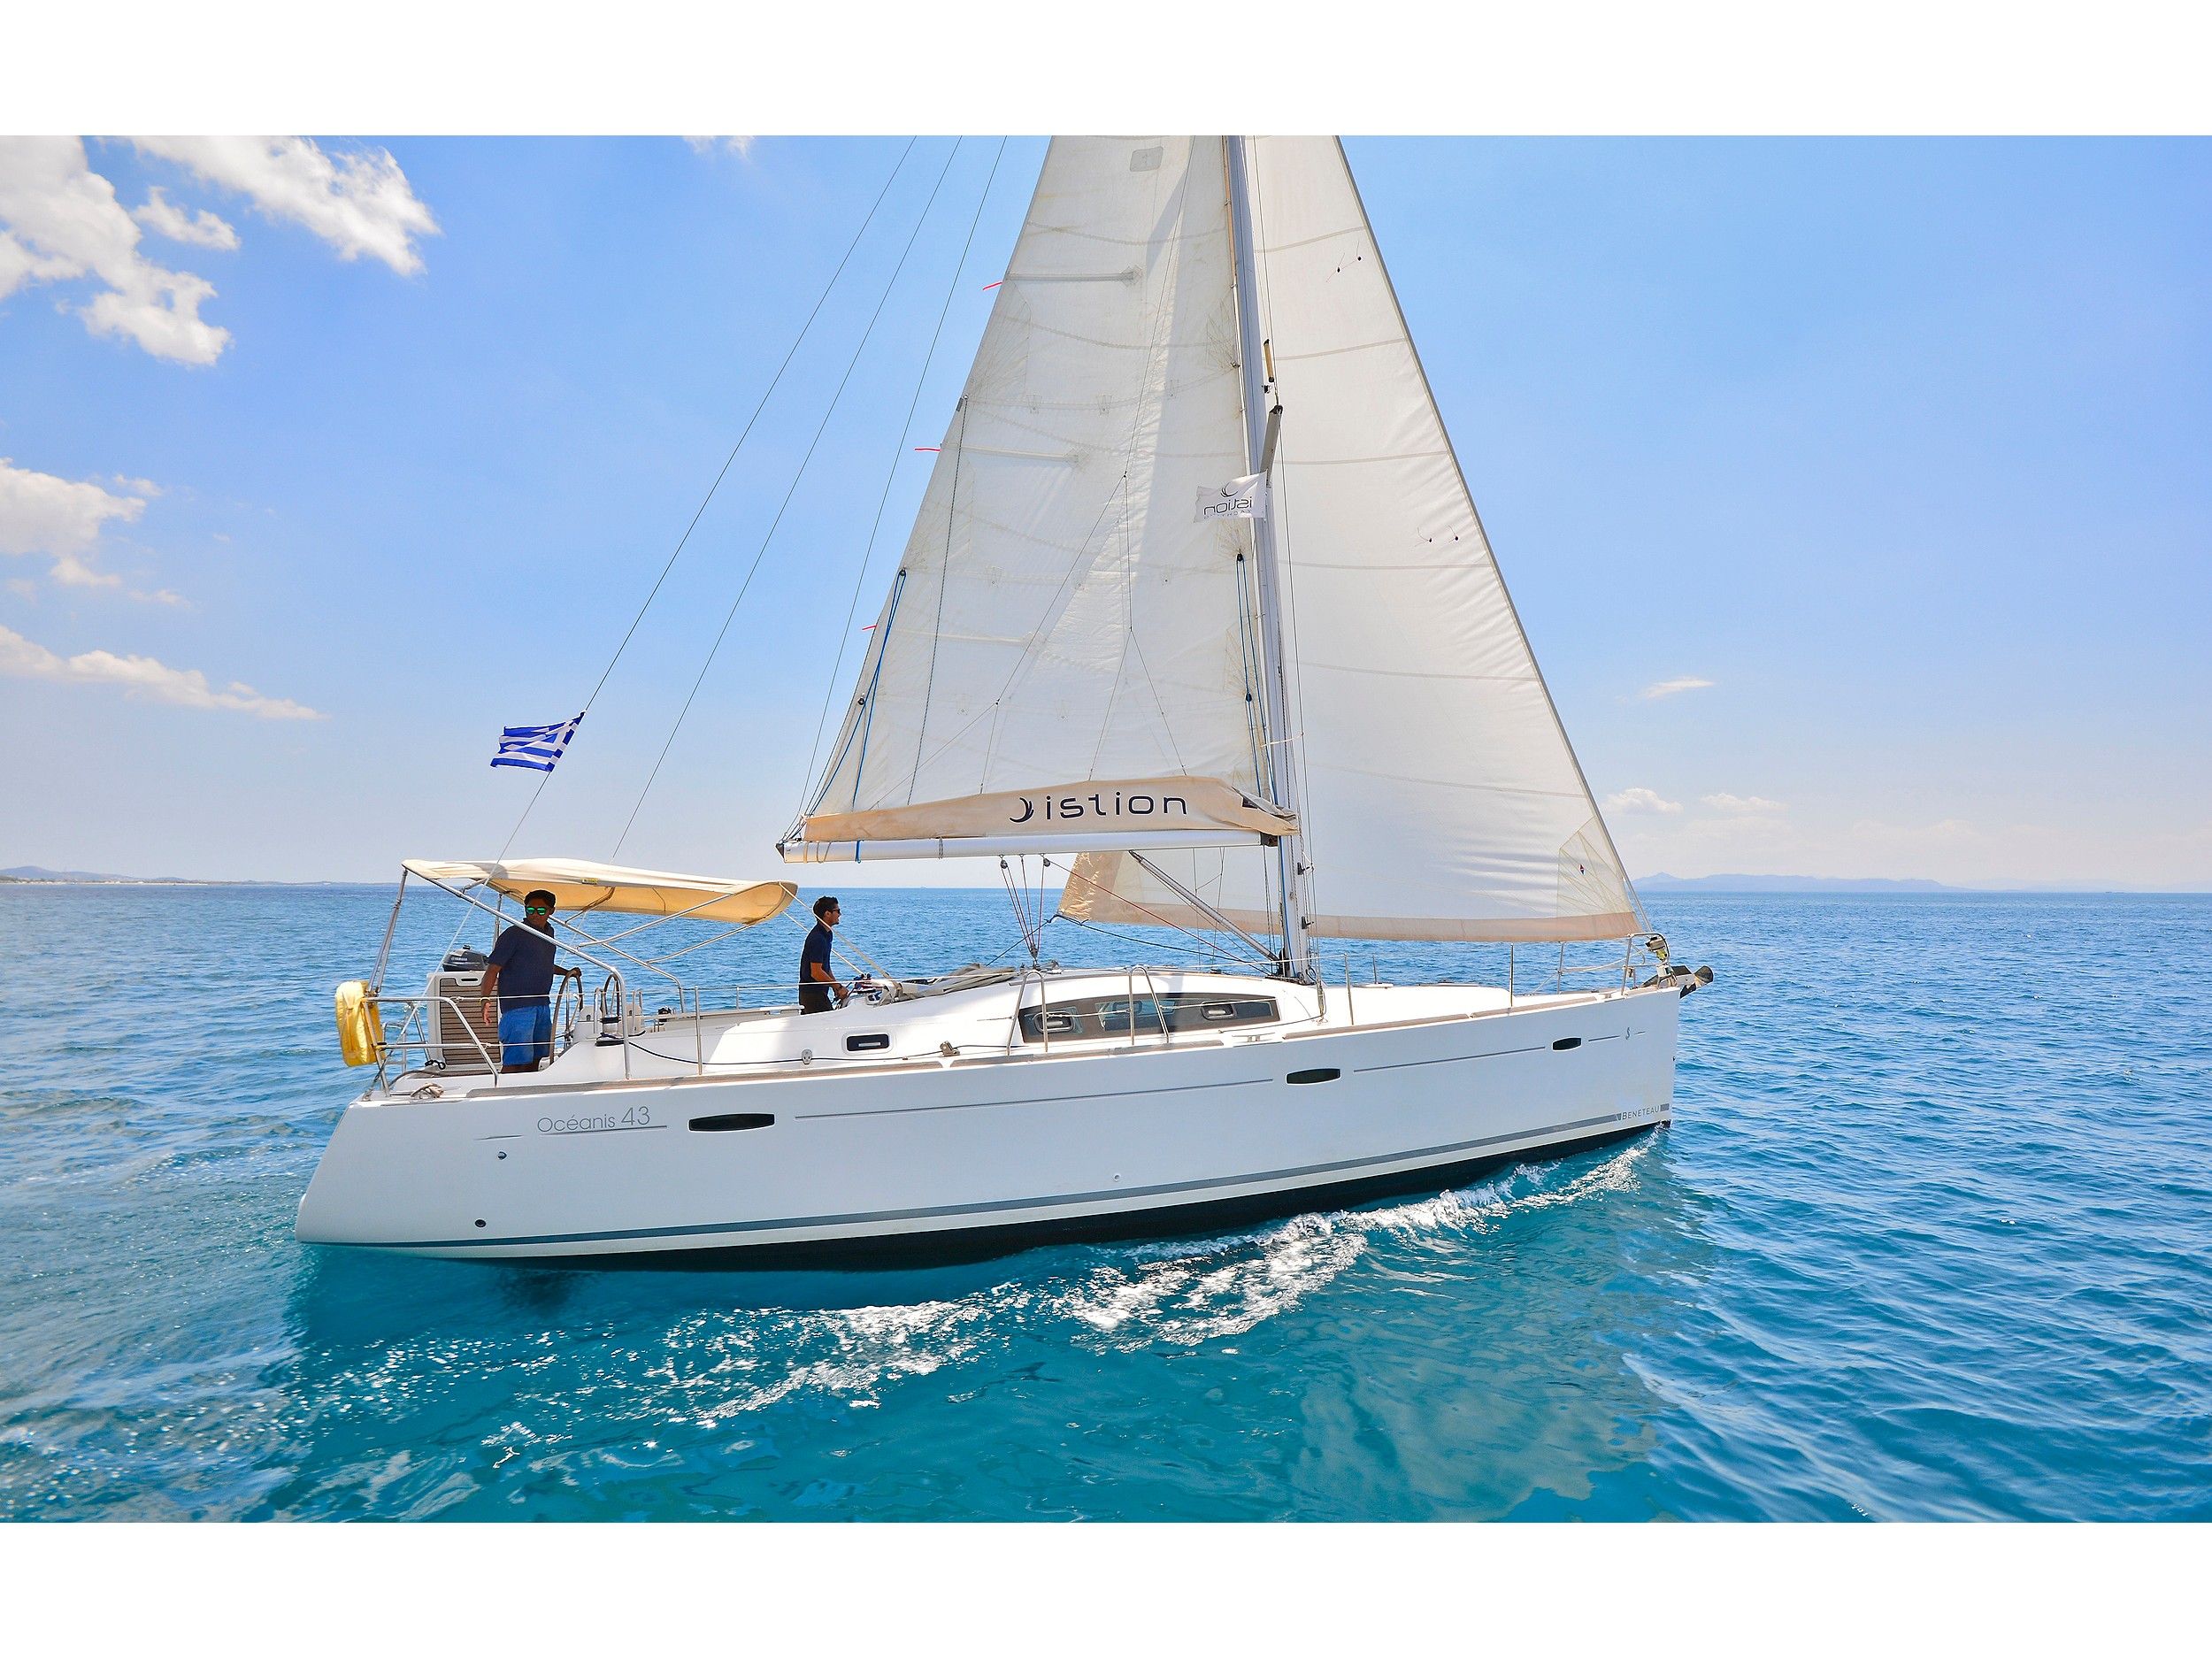 Oceanis 43, Greece, Dodecanese, Cost